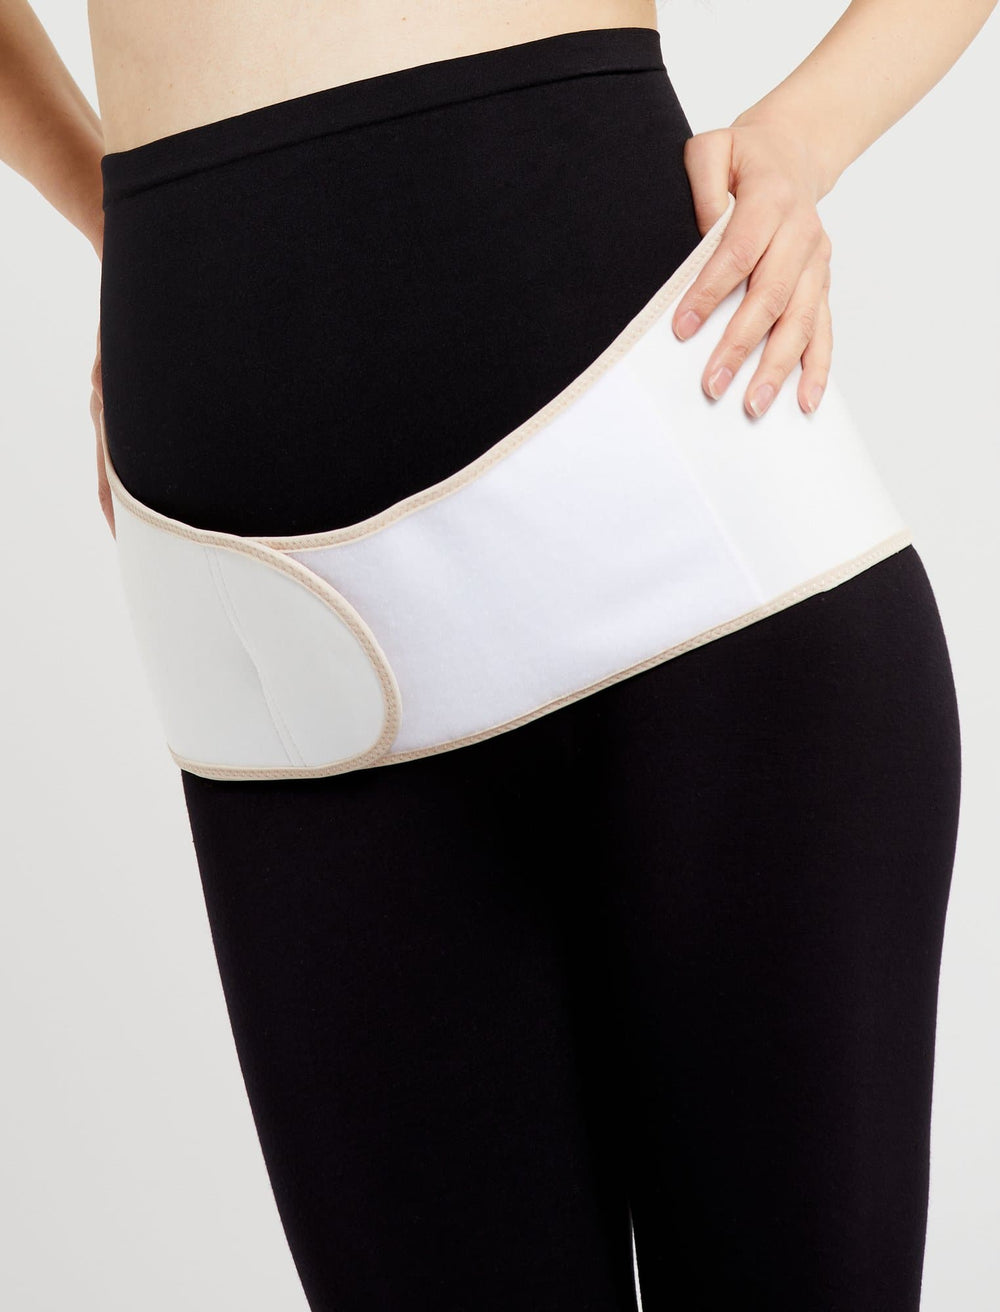 Belly Bandit V-Sling Pelvic Support Band - A Pea In the Pod